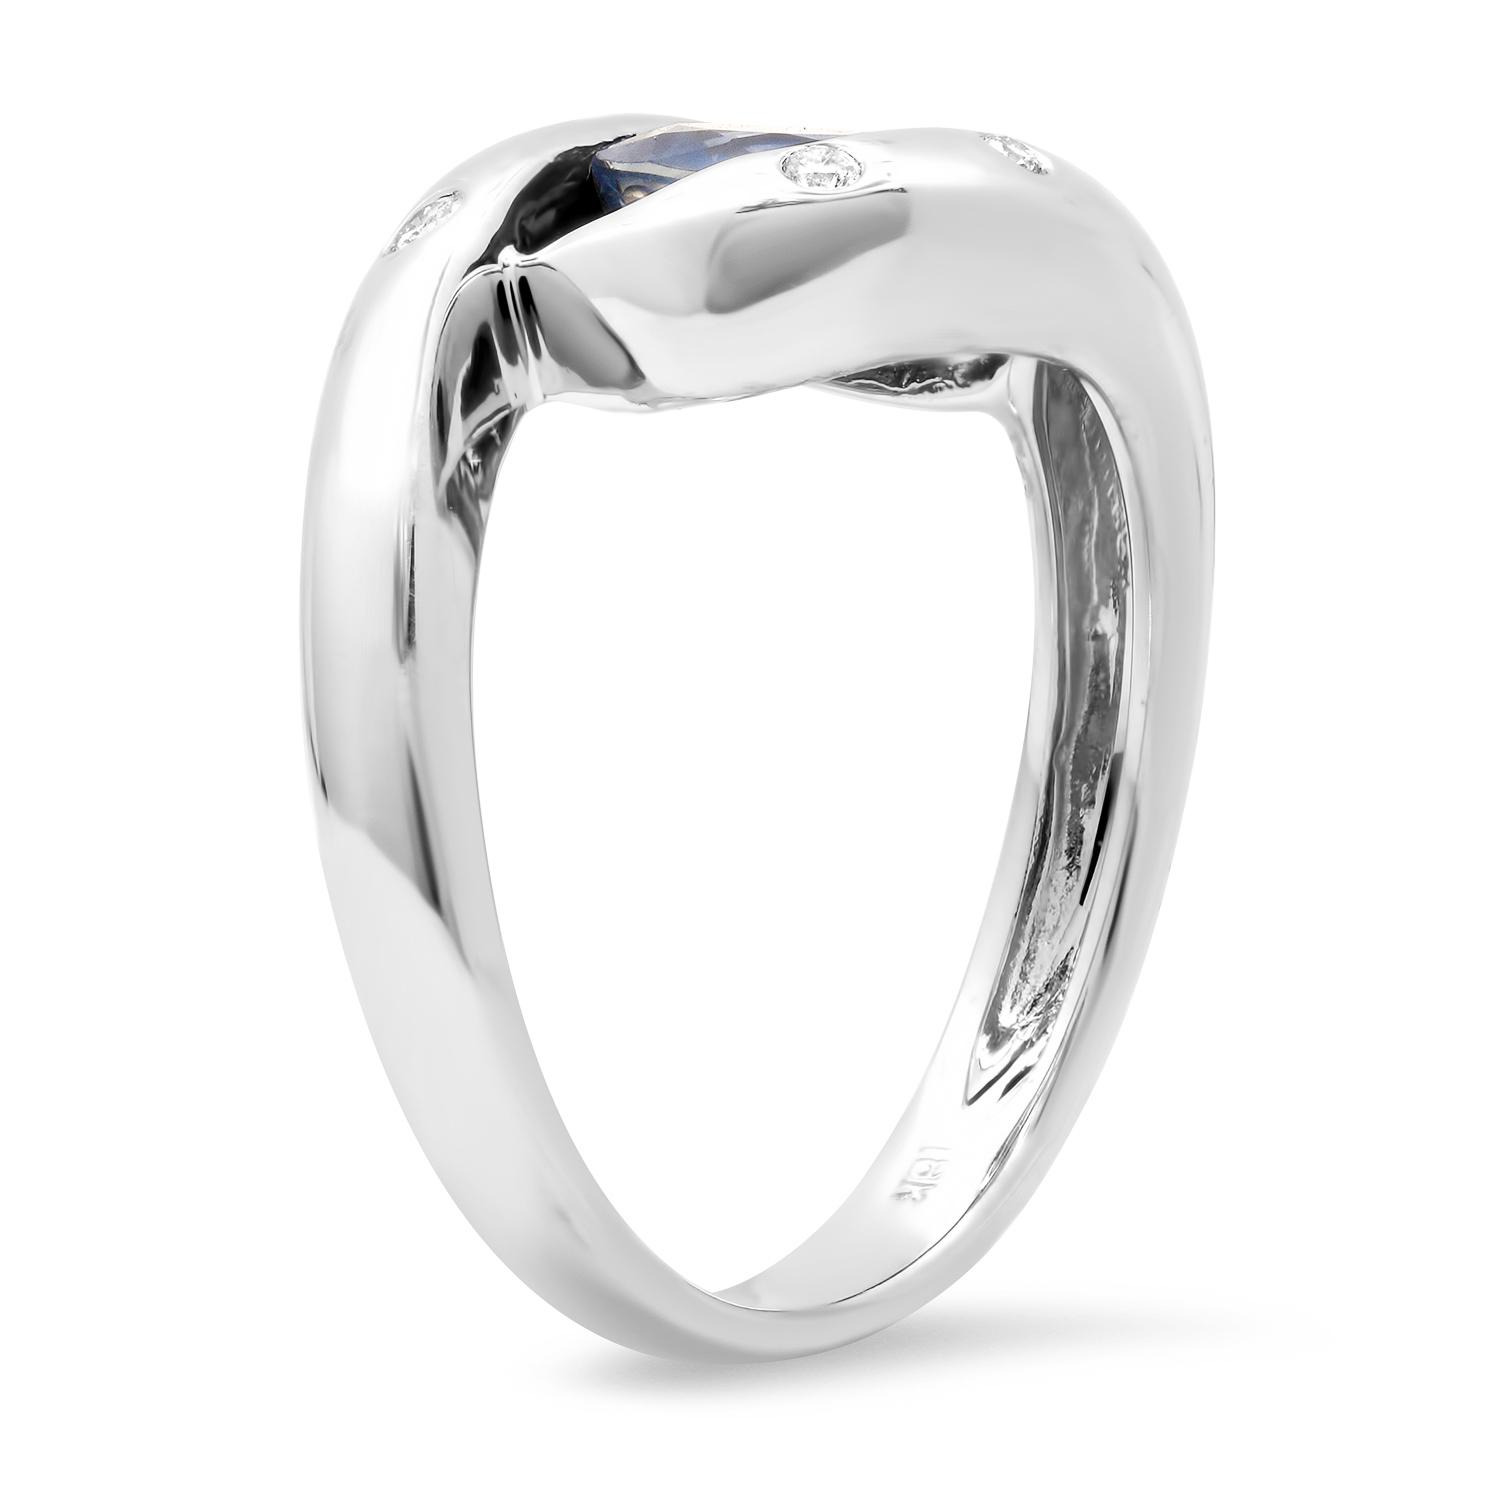 18K White Gold Setting with 1.49ct Sapphire and 0.12ct Diamond Ring